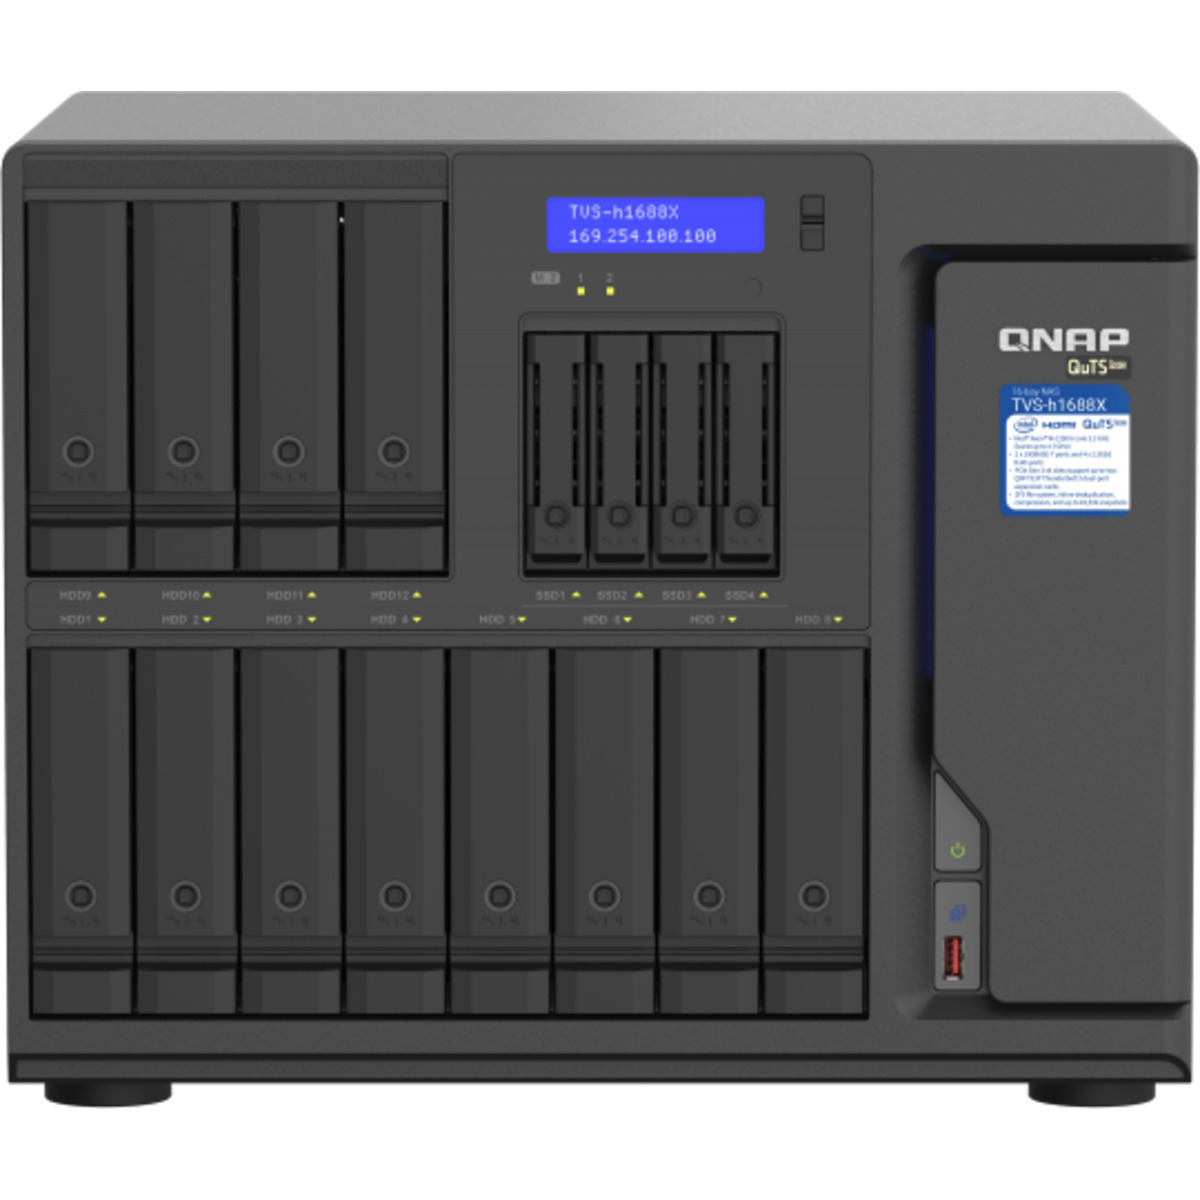 QNAP TVS-h1688X QuTS hero NAS 168tb 12+4-Bay Desktop Multimedia / Power User / Business NAS - Network Attached Storage Device 7x24tb Western Digital Ultrastar HC580 SED WUH722424ALE6L1 3.5 7200rpm SATA 6Gb/s HDD ENTERPRISE Class Drives Installed - Burn-In Tested TVS-h1688X QuTS hero NAS